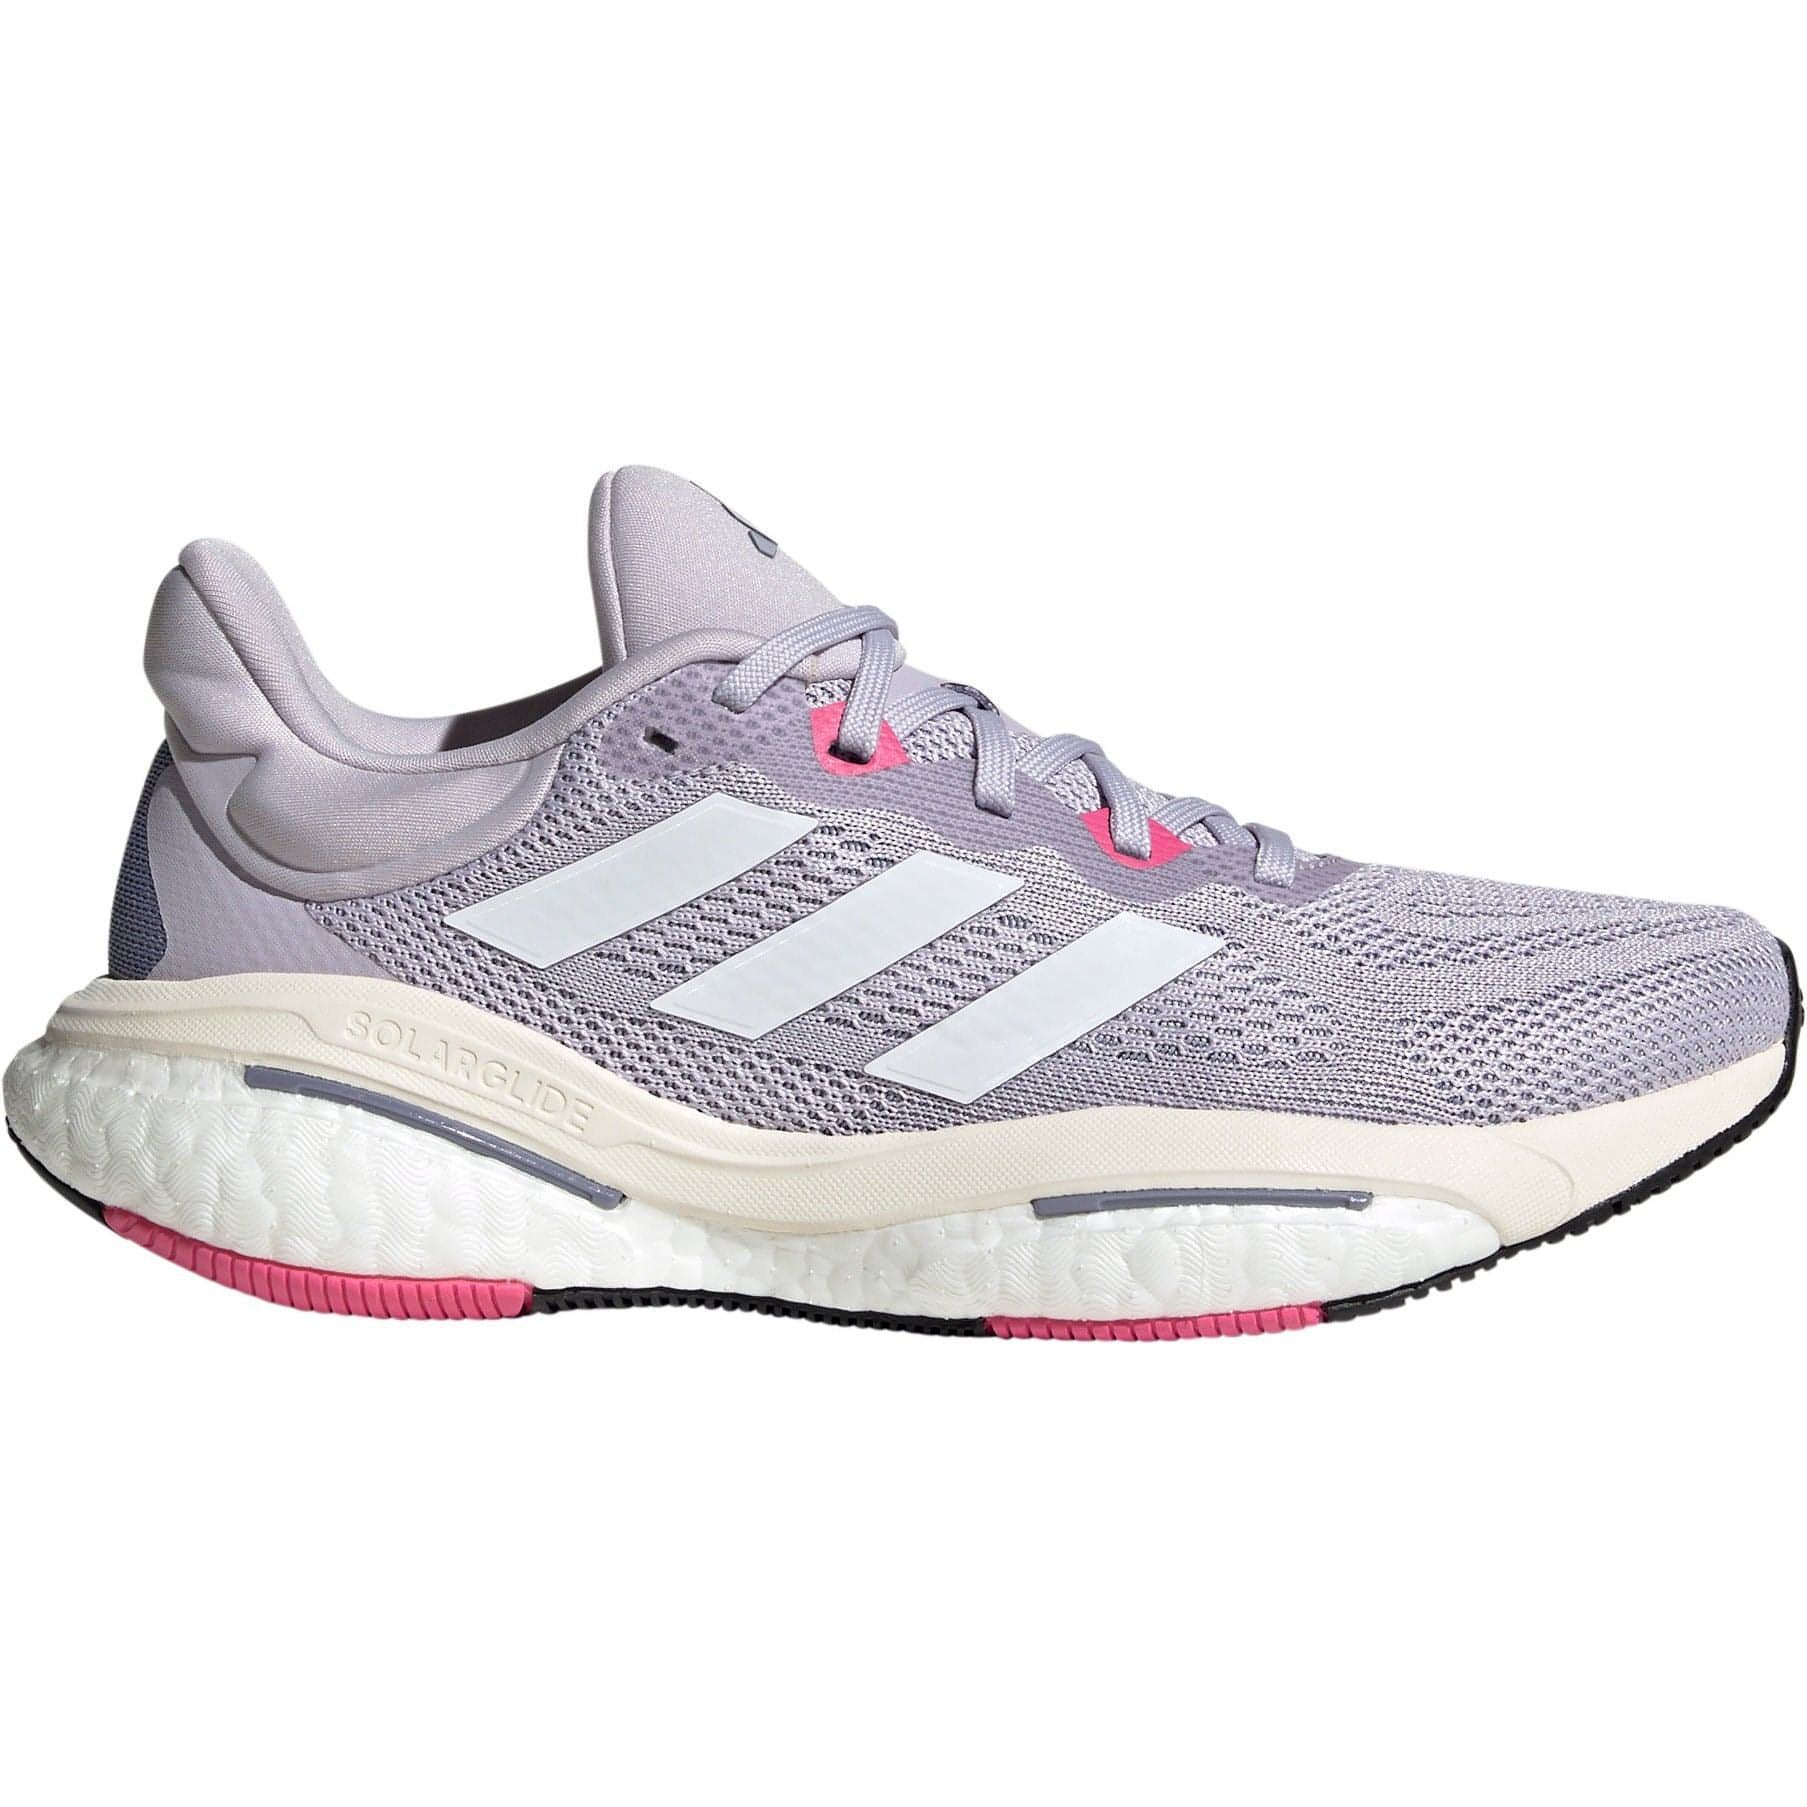 adidas SolarGlide 6 Womens Running Shoes - Purple